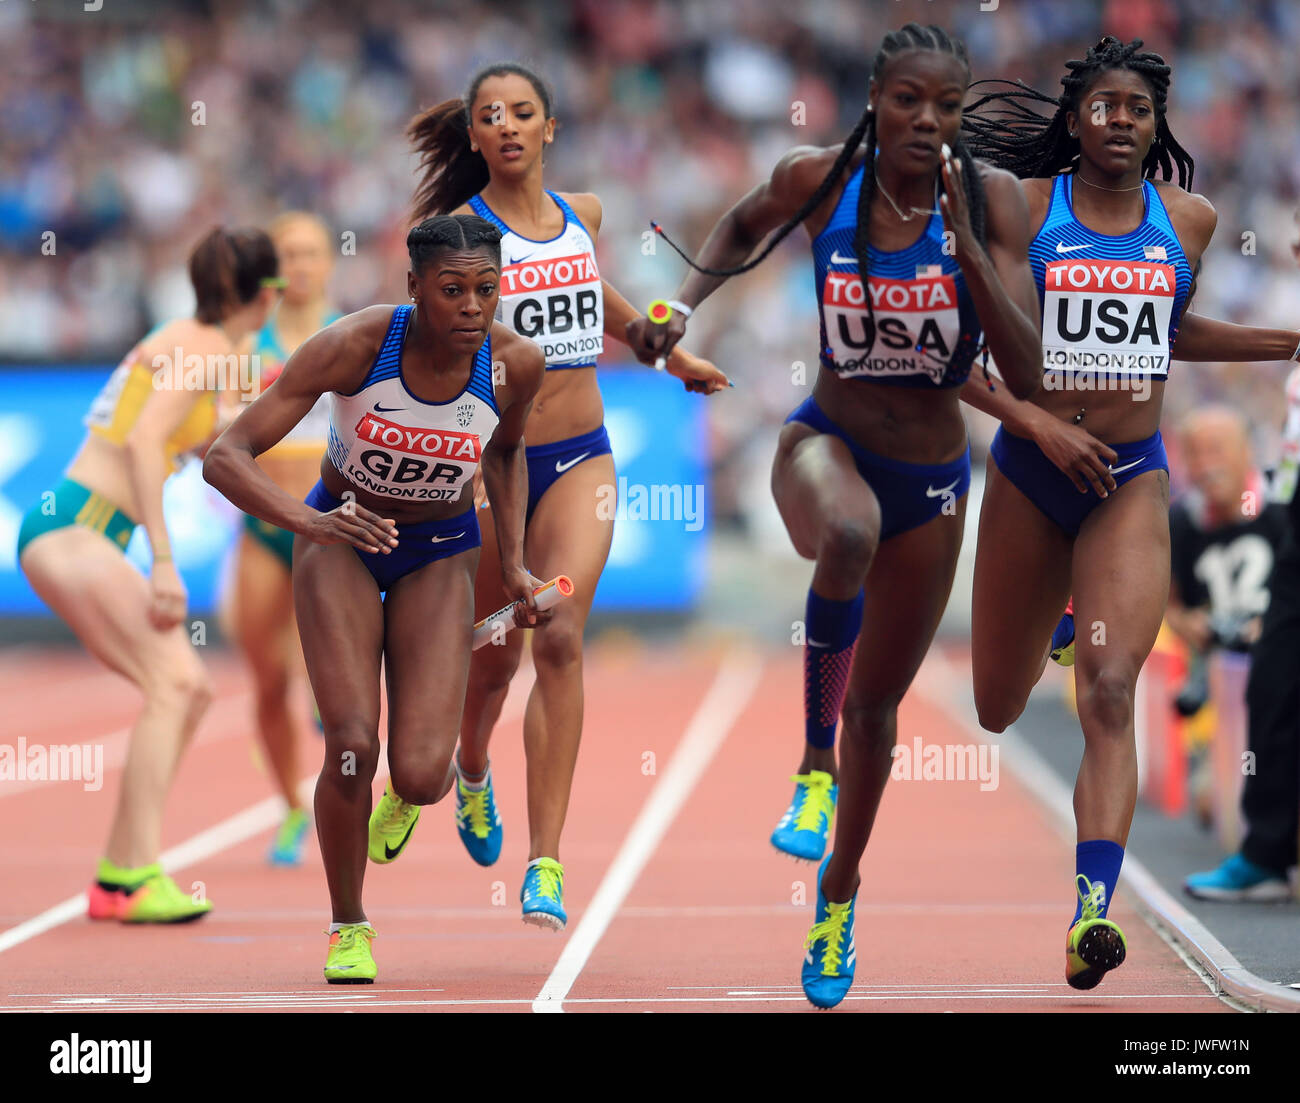 Great Britain's Perri Shakes Drayton and Laviai Nielsen in the Women's 4x100m Relay heat one during day nine of the 2017 IAAF World Championships at the London Stadium. Stock Photo